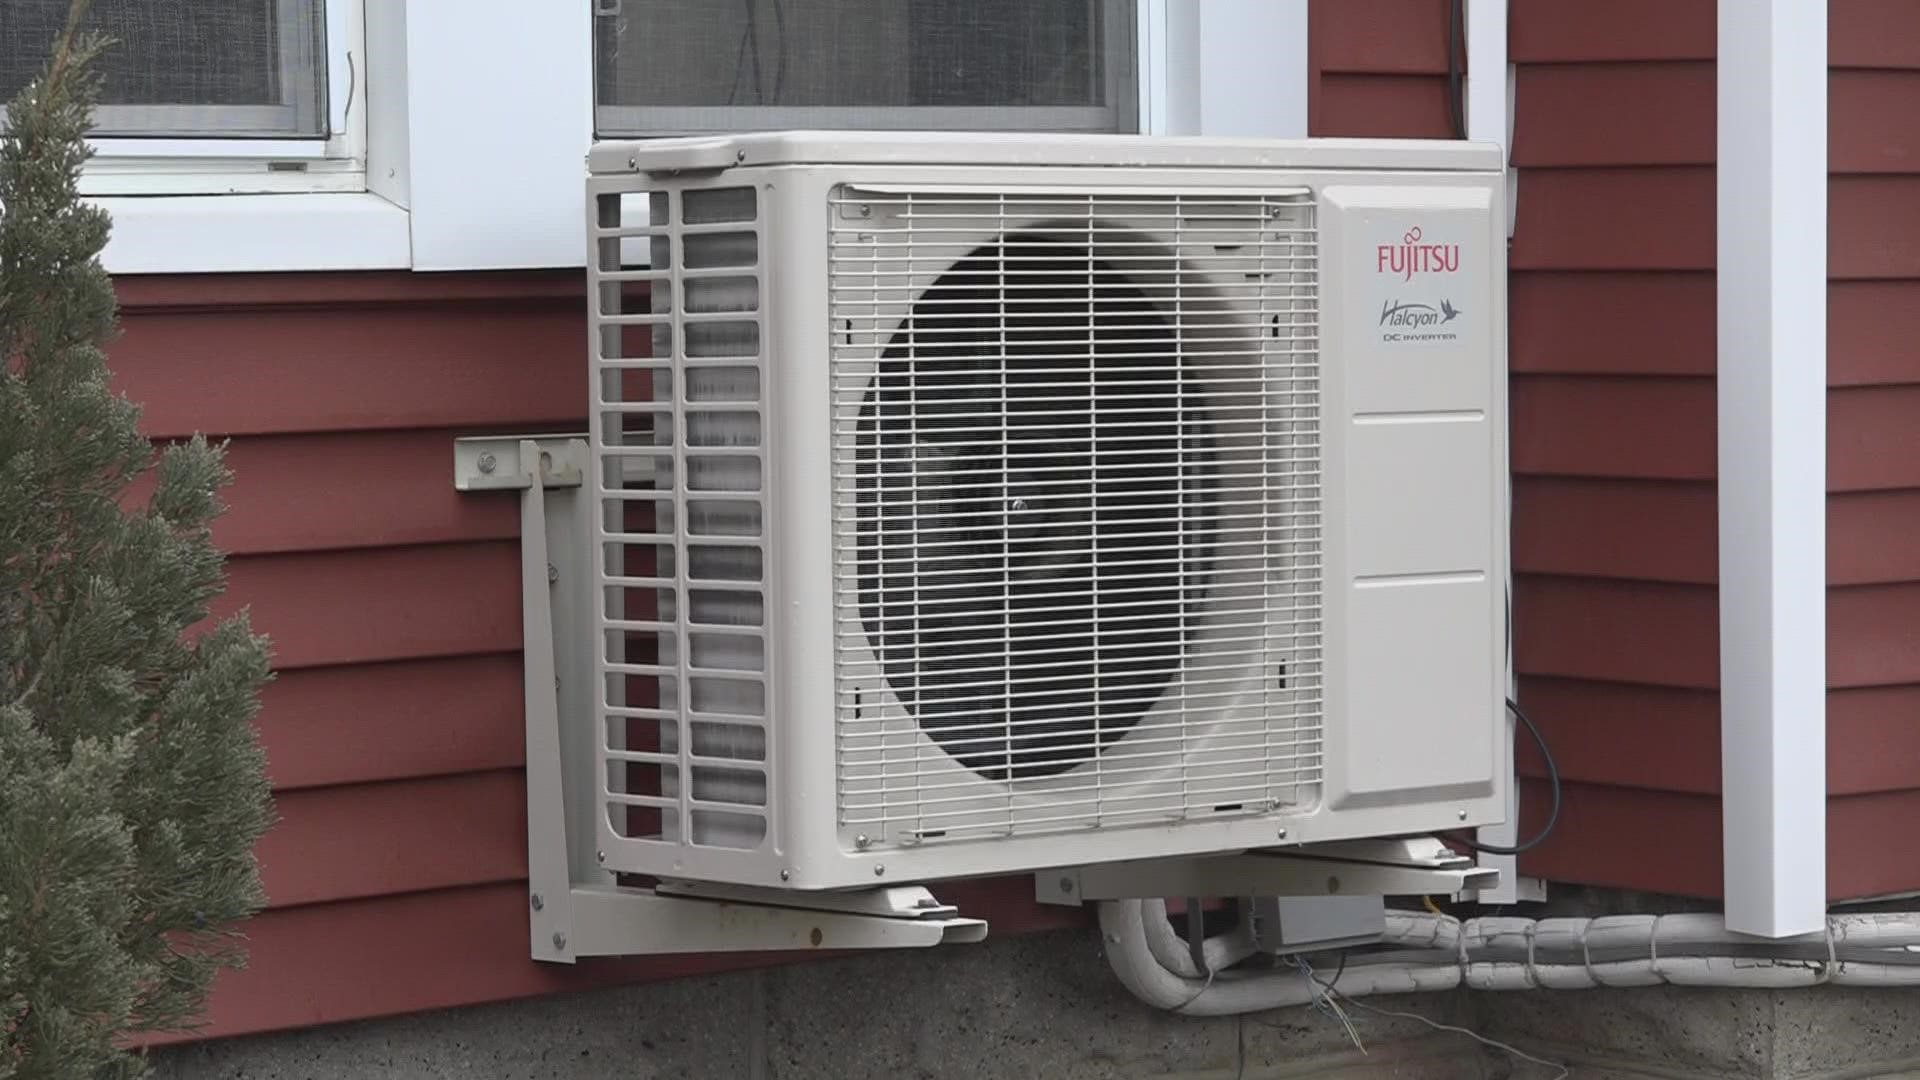 City of Bangor launches new grant program to help qualifying families heat their homes.